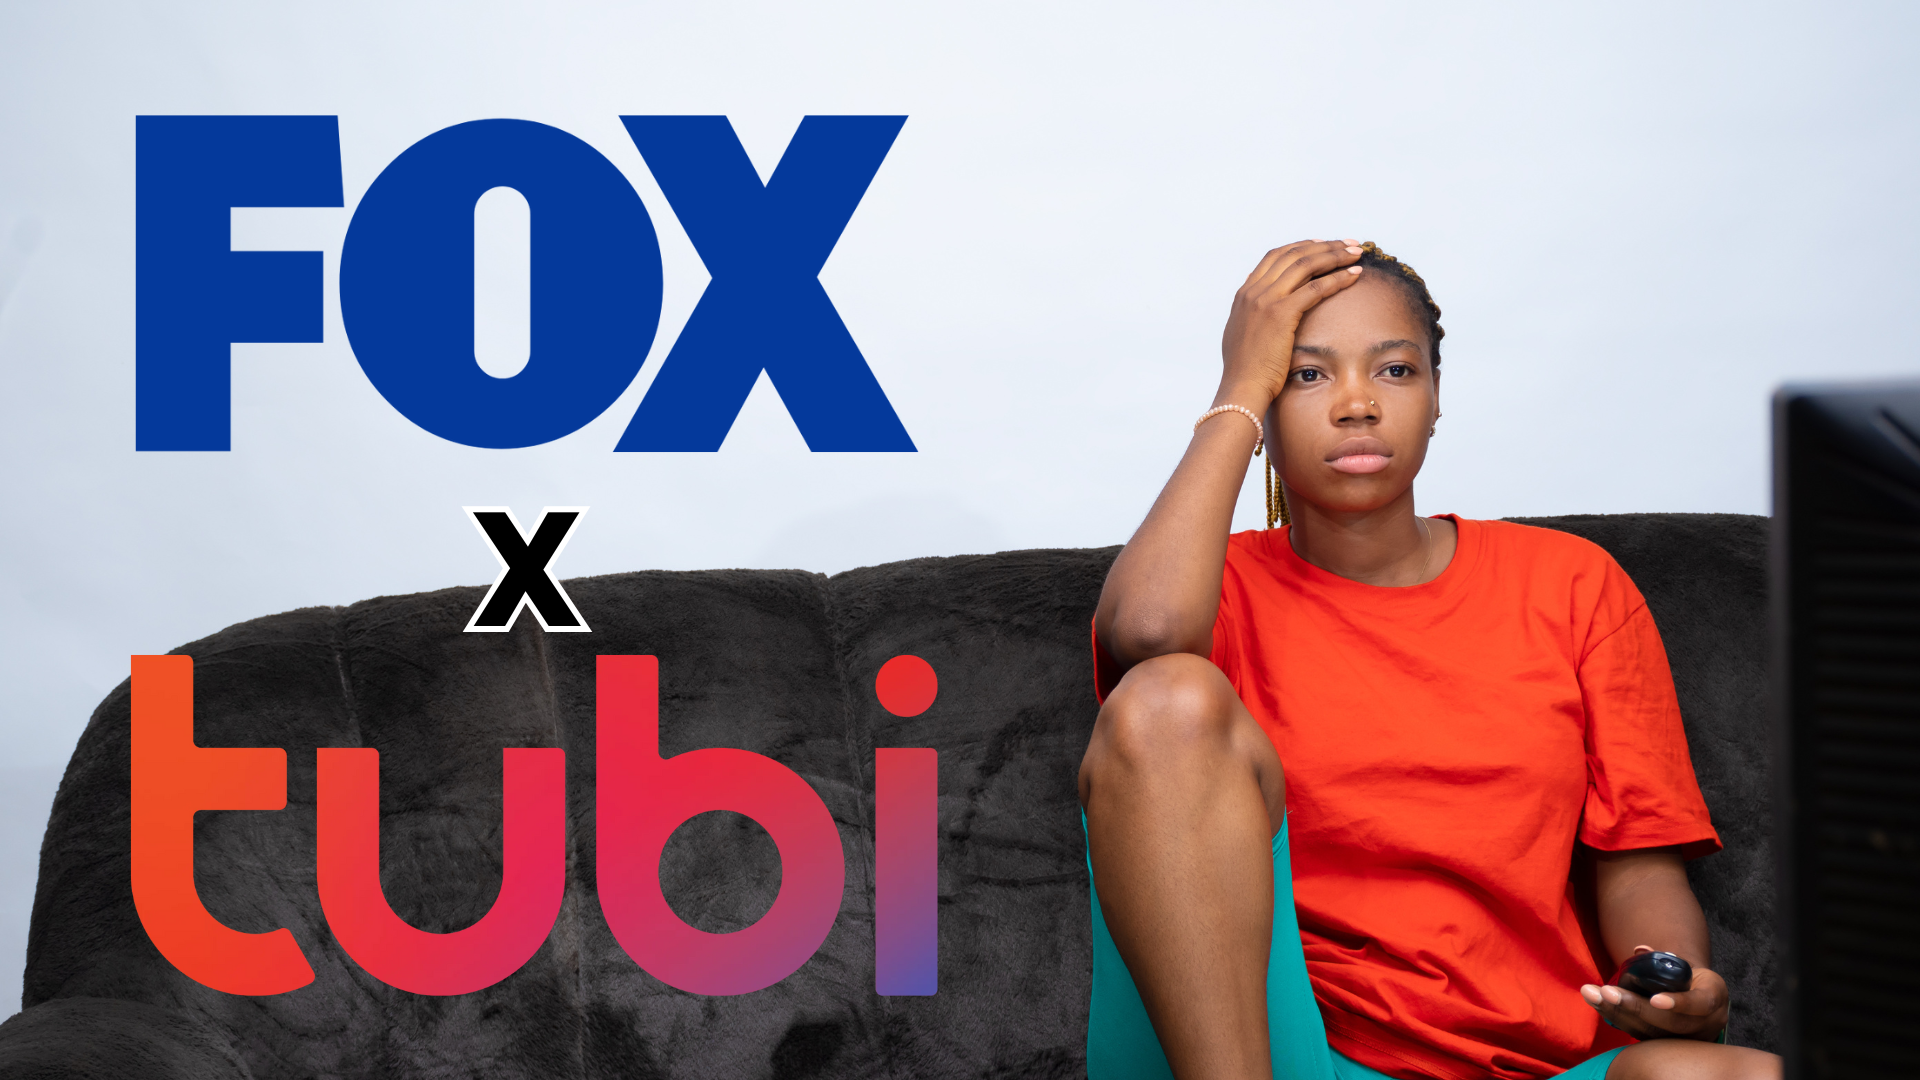 Tubi's Acquisition By Fox And The Concerning Impact on The Black Community